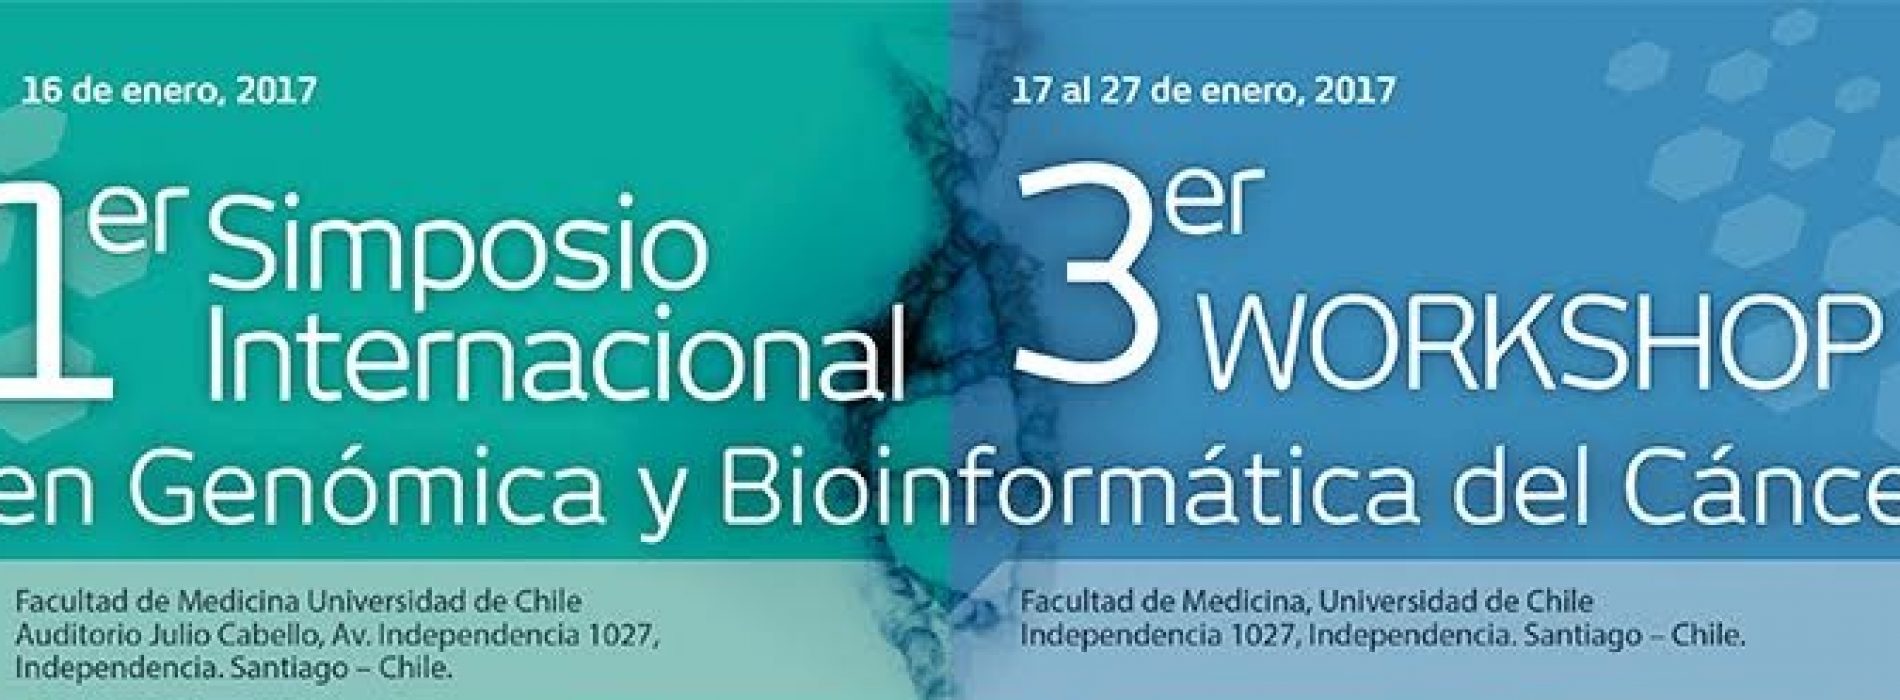 Symposium and Workshop on Genomics and Bioinformatics of the Cancer